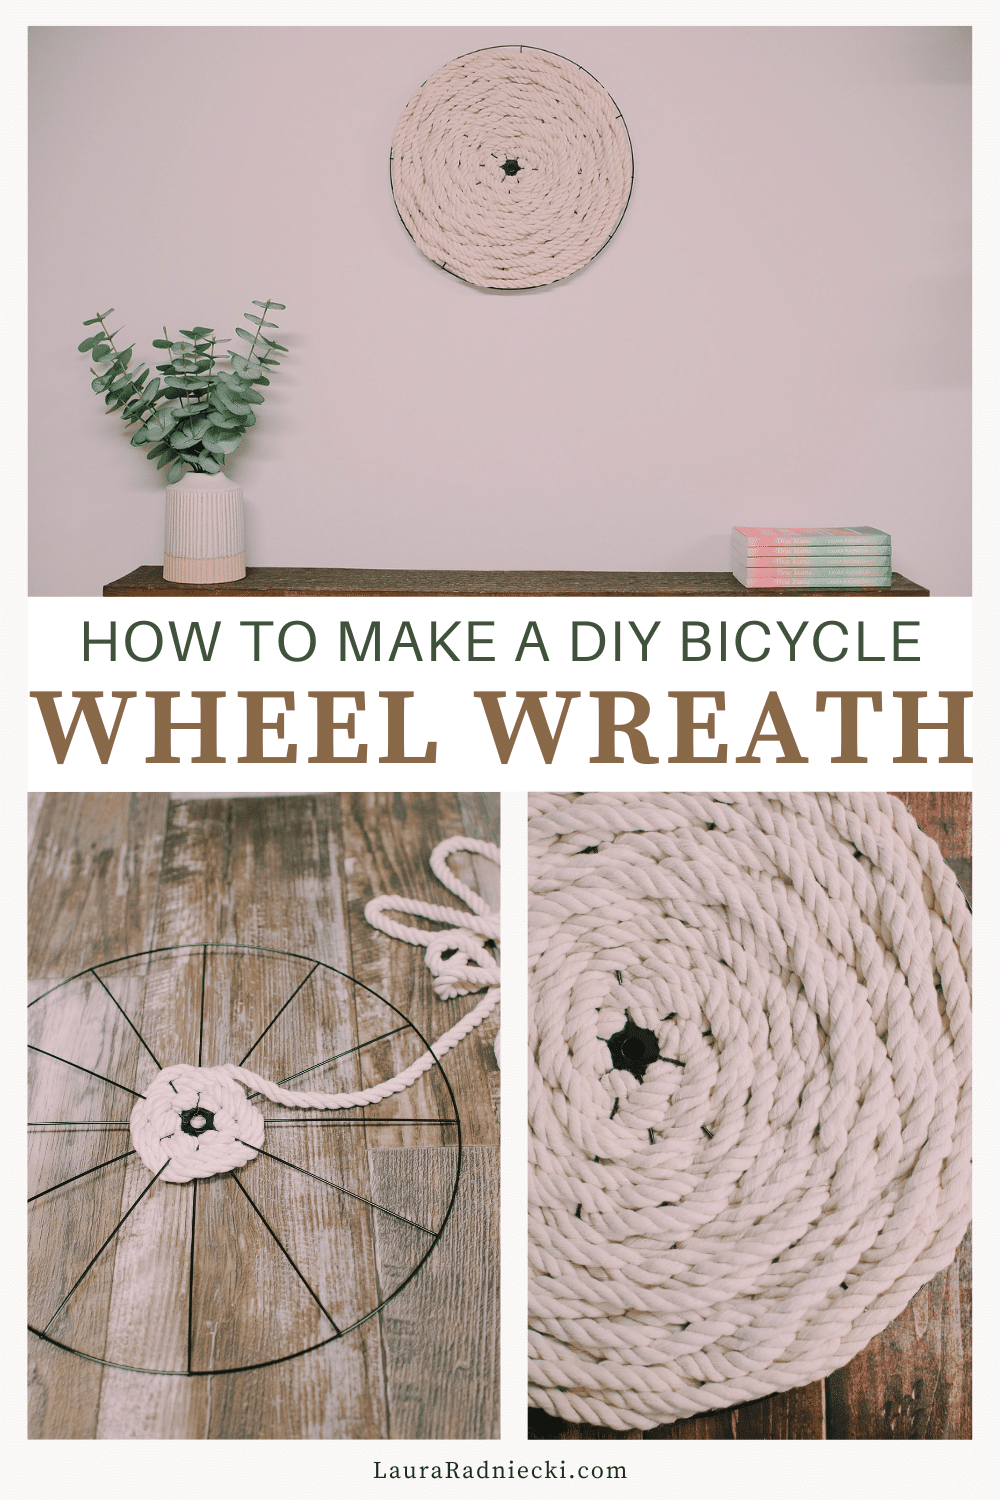 How to Make a Rope Bicycle Wheel Wreath